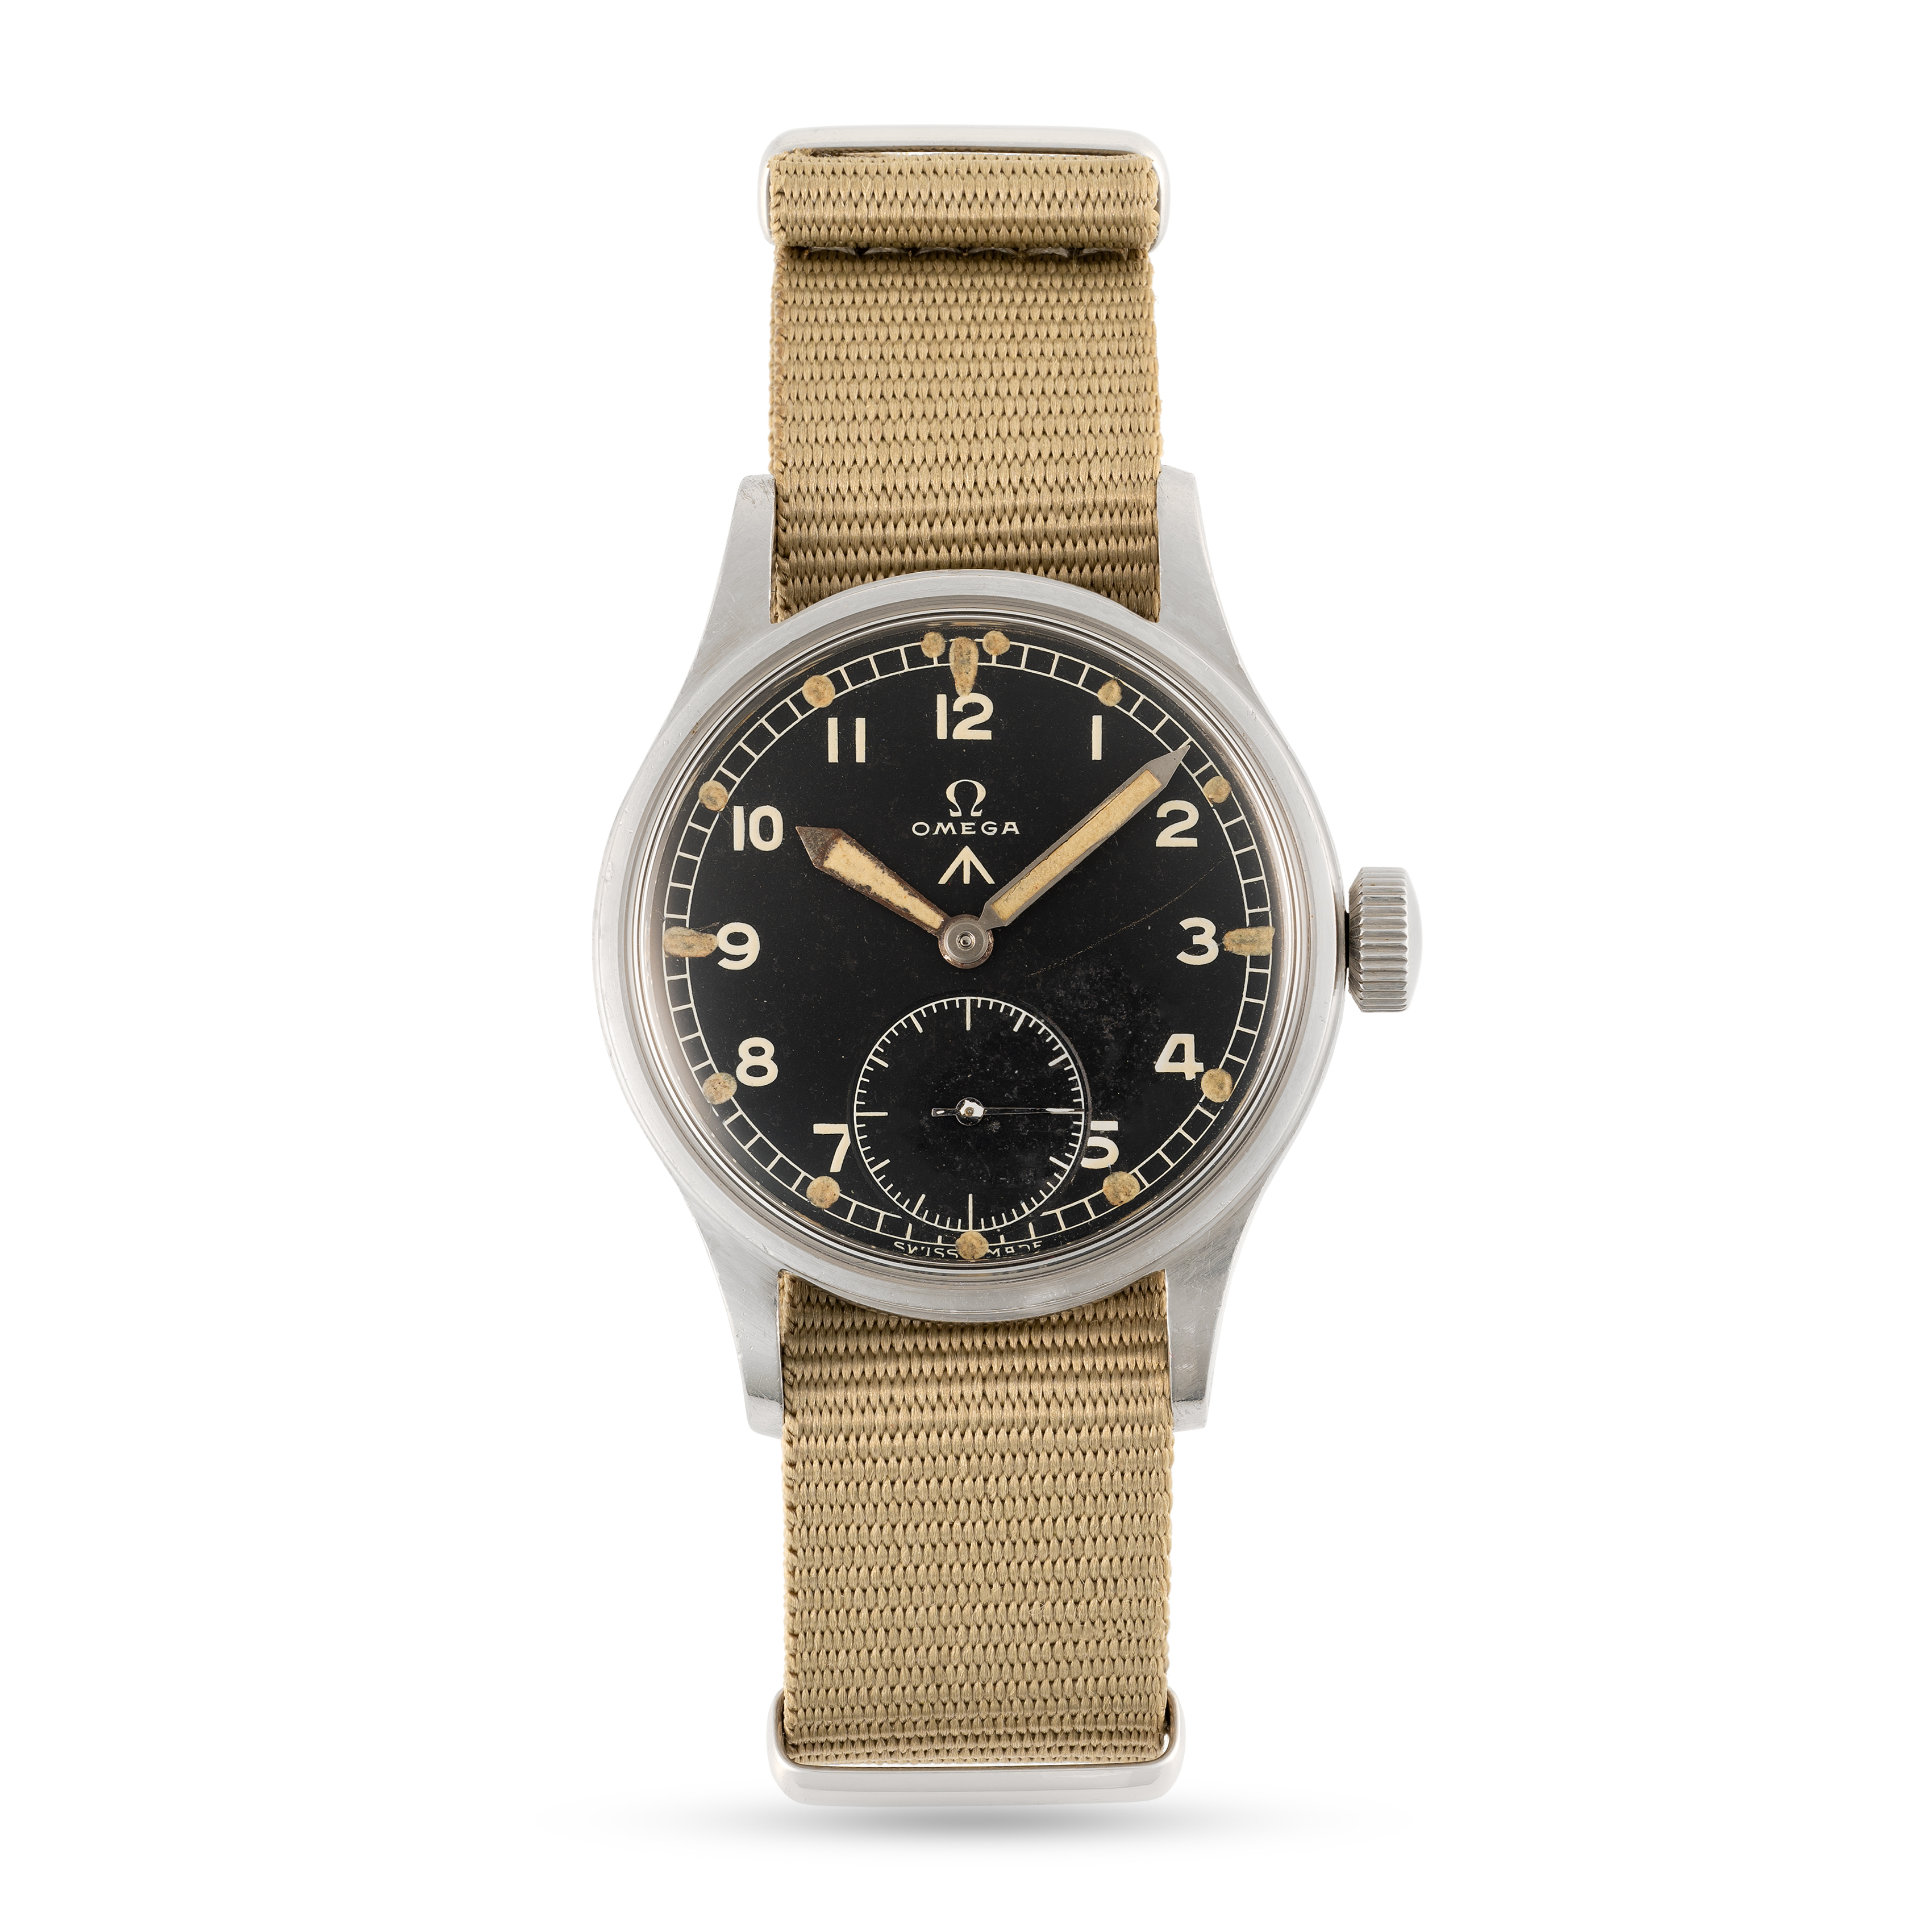 A GENTLEMAN'S STAINLESS STEEL BRITISH MILITARY OMEGA W.W.W. WRIST WATCH CIRCA 1945, PART OF THE " - Image 2 of 8